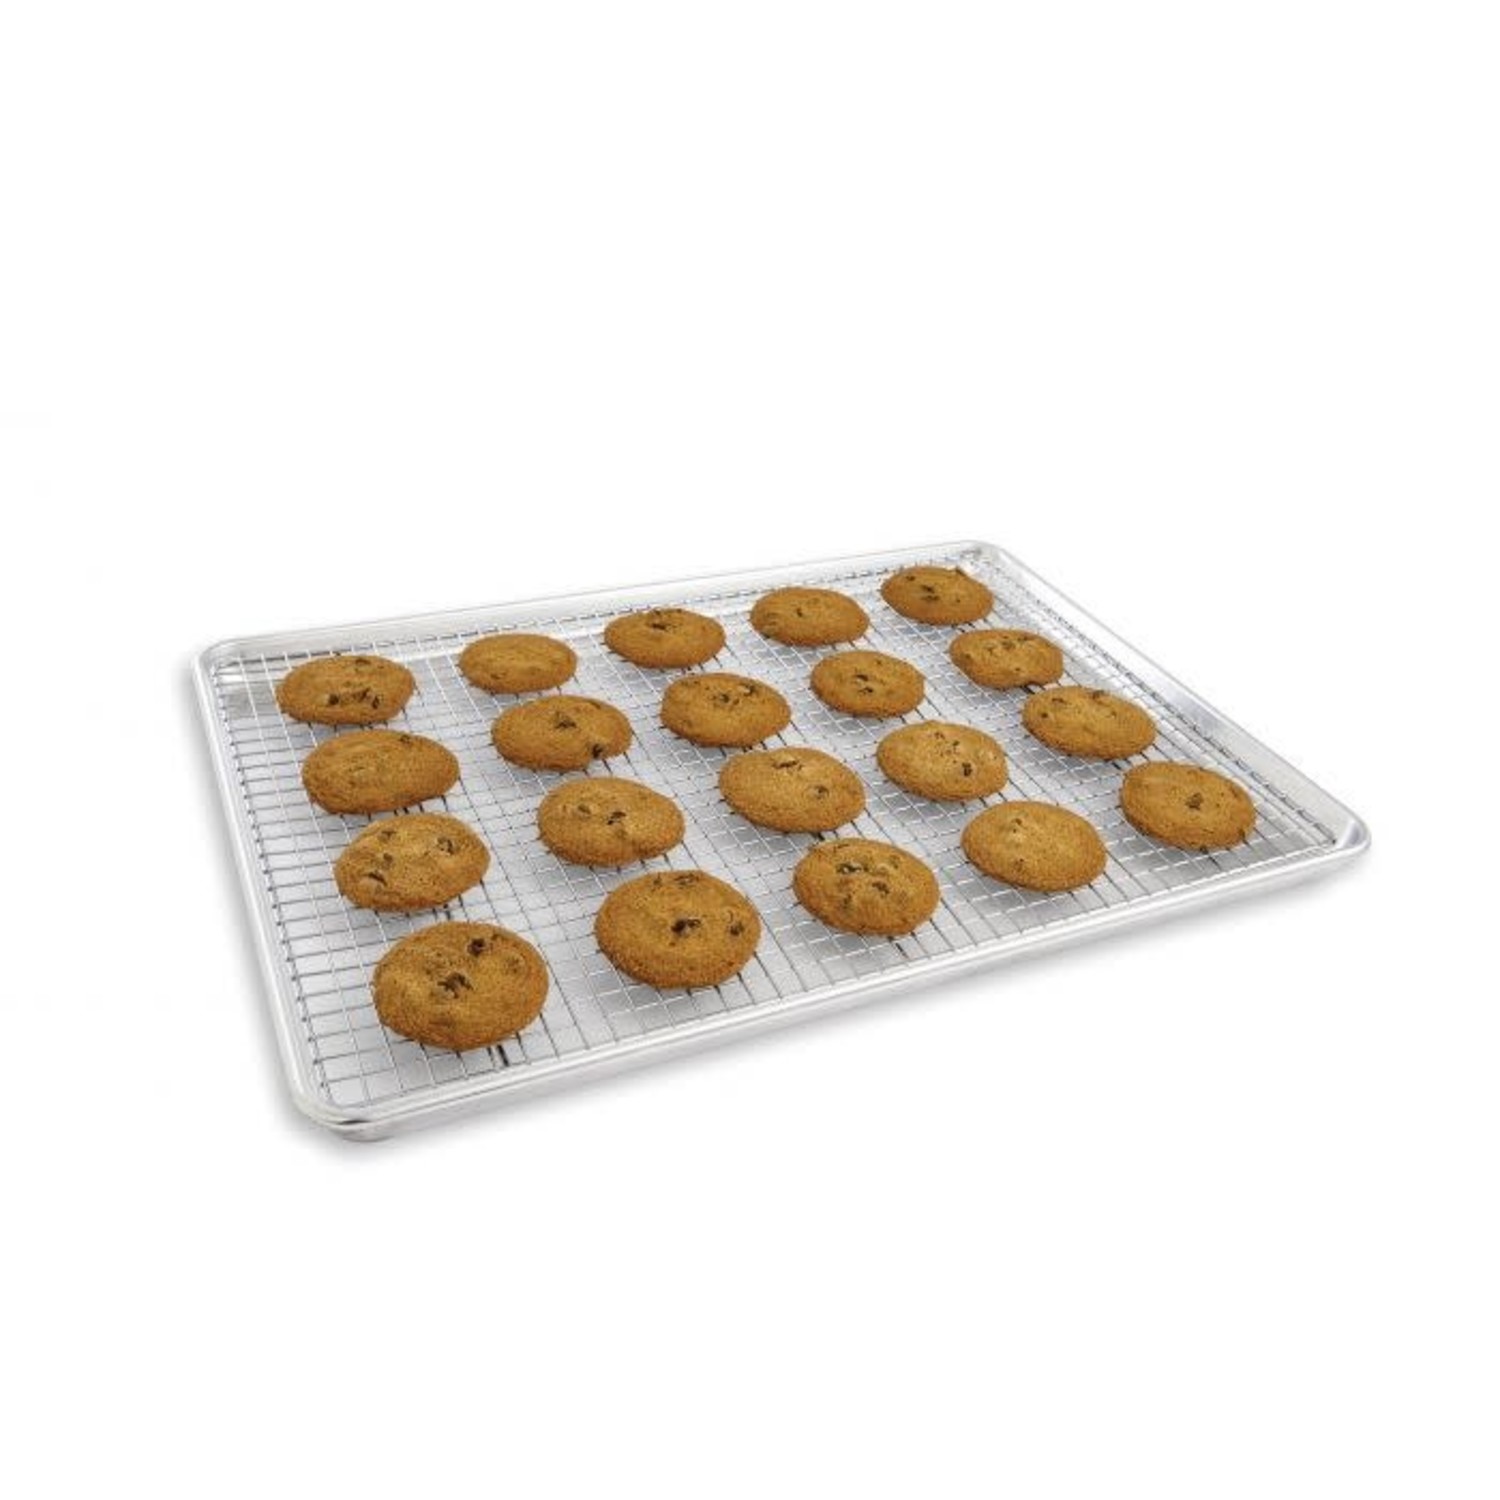 Mrs Andersons Baking Professional Half Sheet and Cooling Rack, Silver